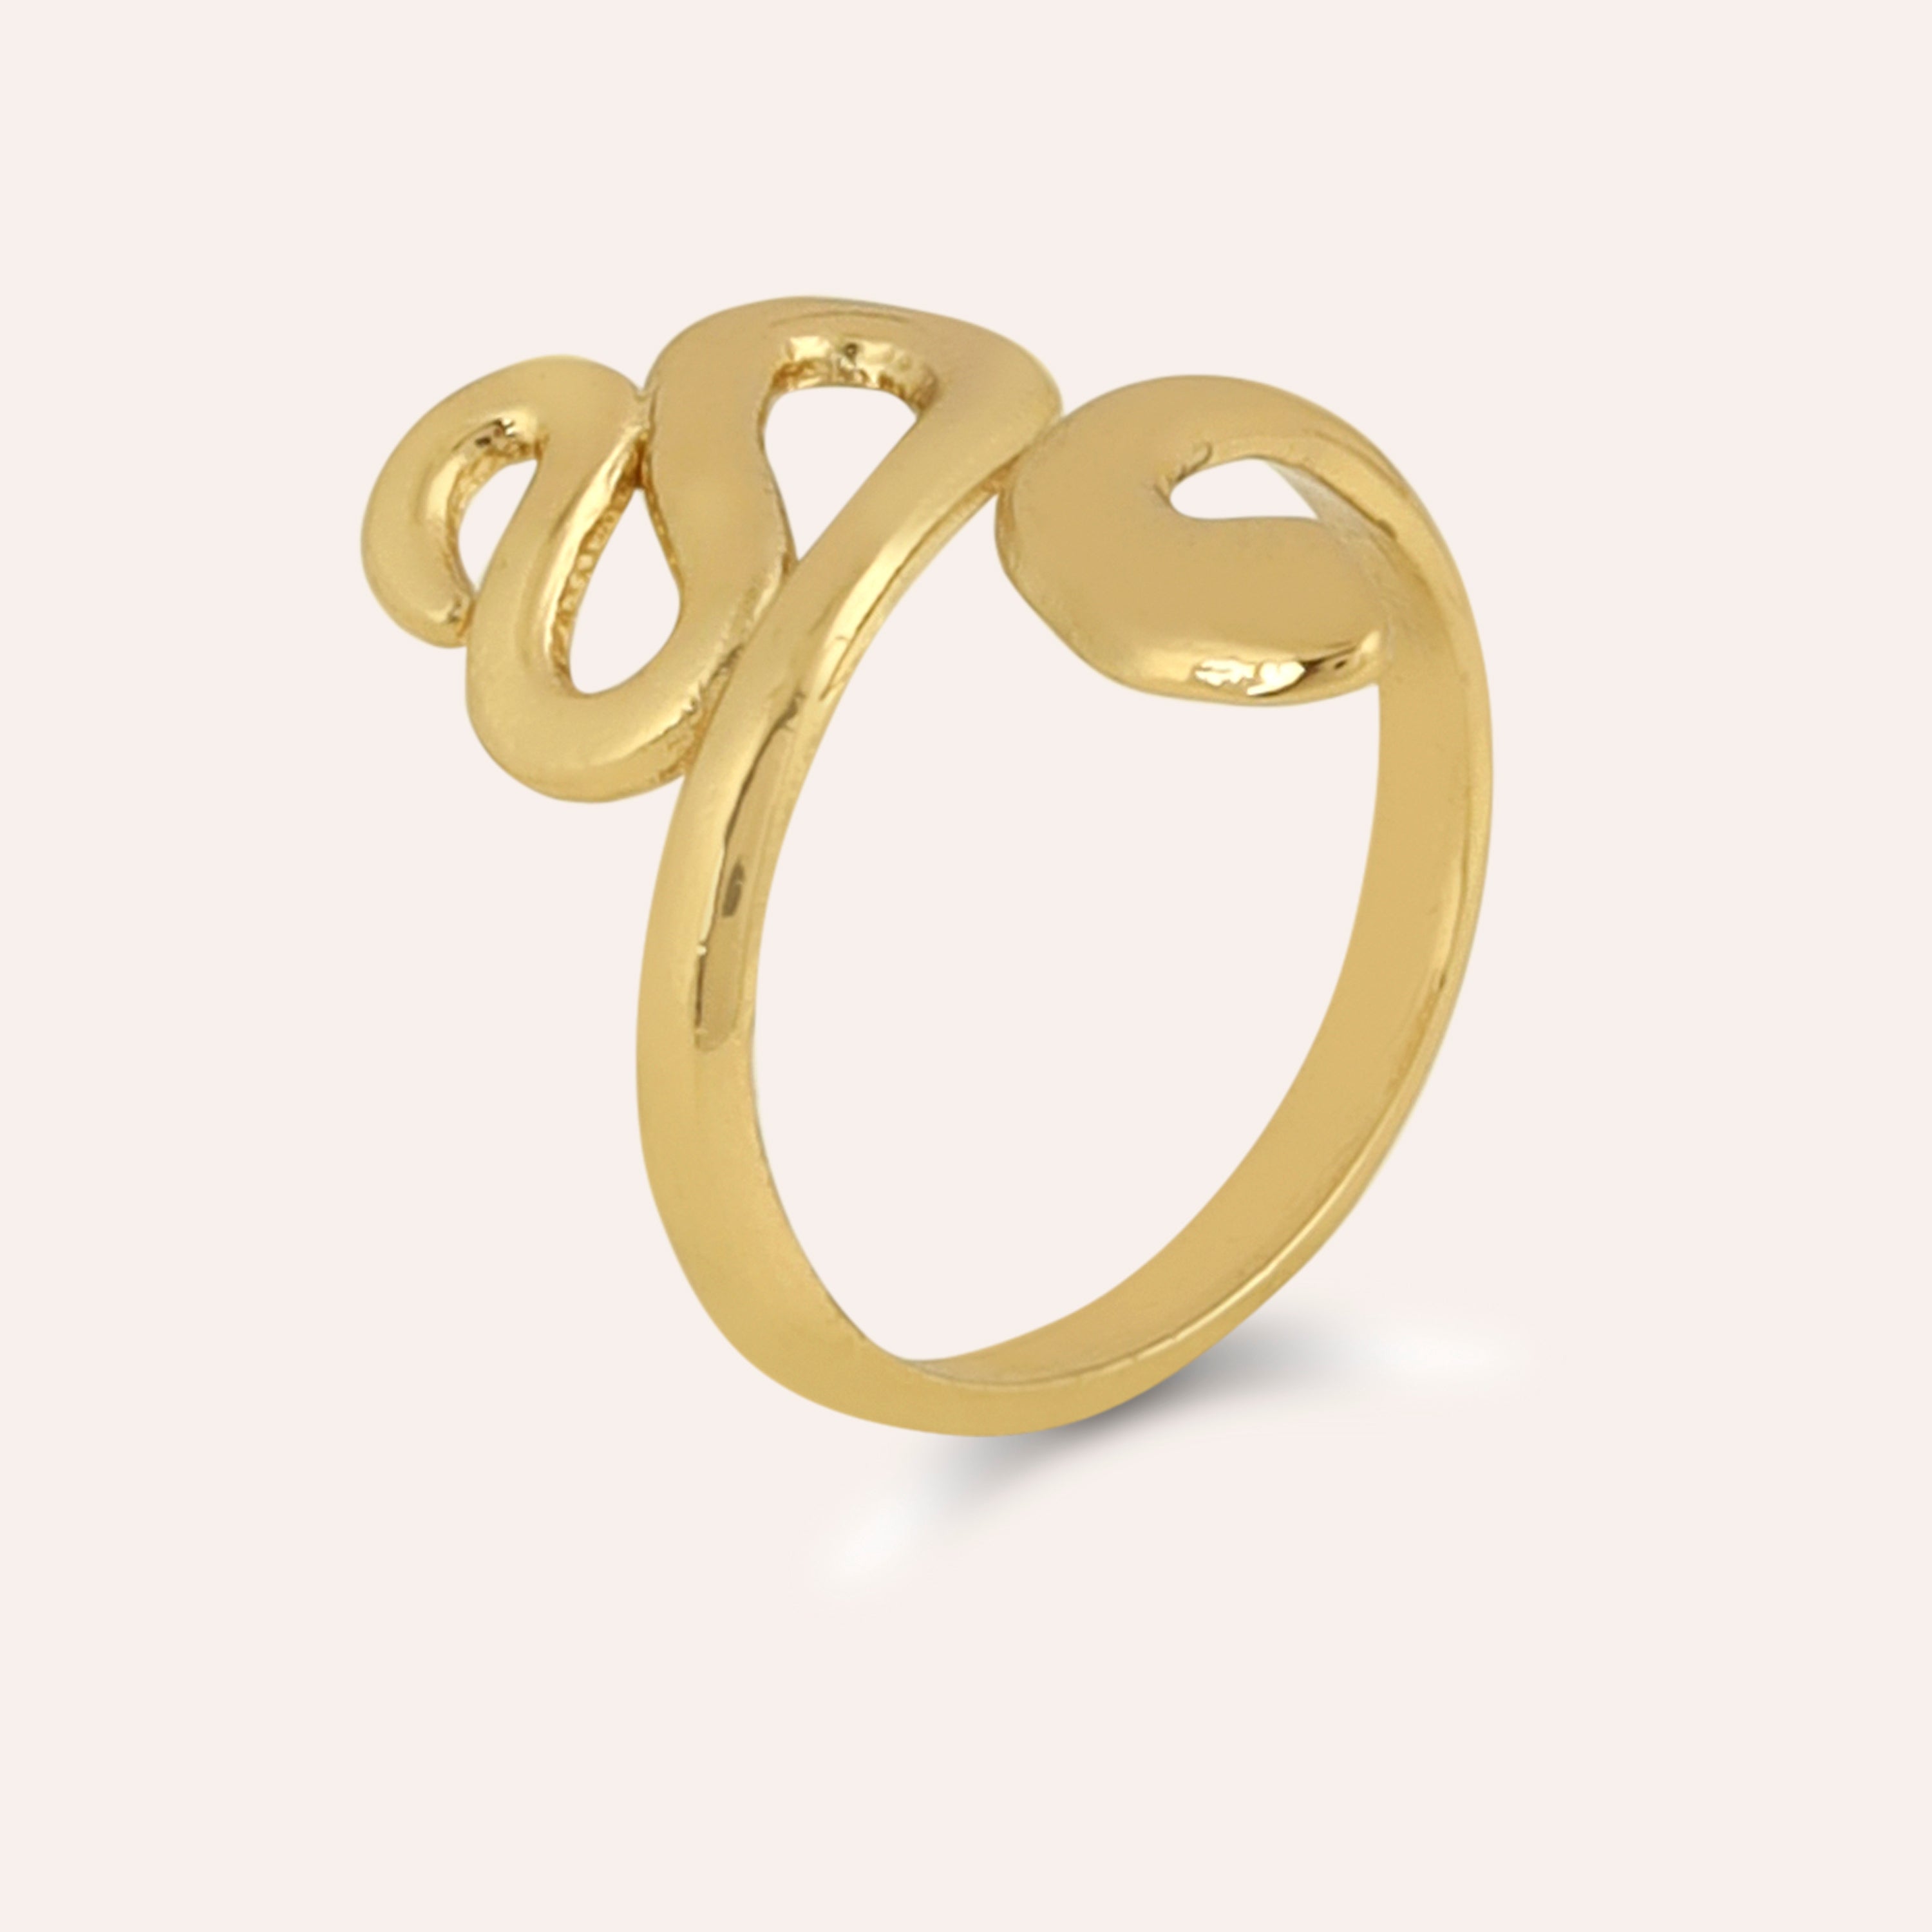 TFC Snake-Head Gold Plated Adjustable Ring-Elevate your style with our exquisite collection of gold-plated adjustable rings for women, including timeless signet rings. Explore cheapest fashion jewellery designs with anti-tarnish properties, all at The Fun Company with a touch of elegance